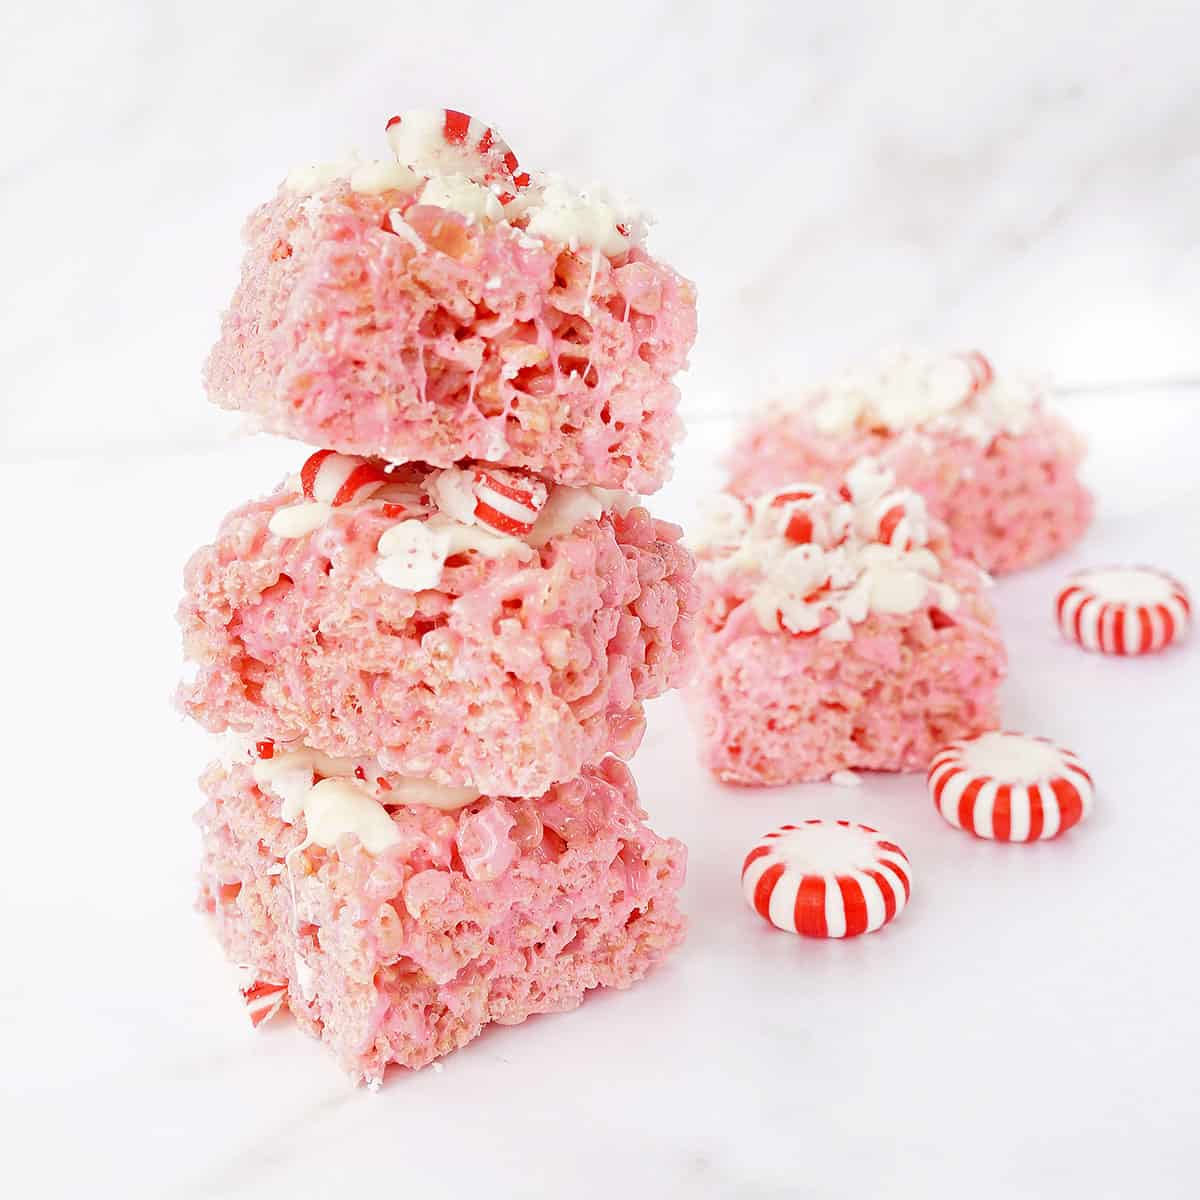 no-bake holiday treat: PEPPERMINT RICE KRISPIE TREATS with white chocolate and crushed candies